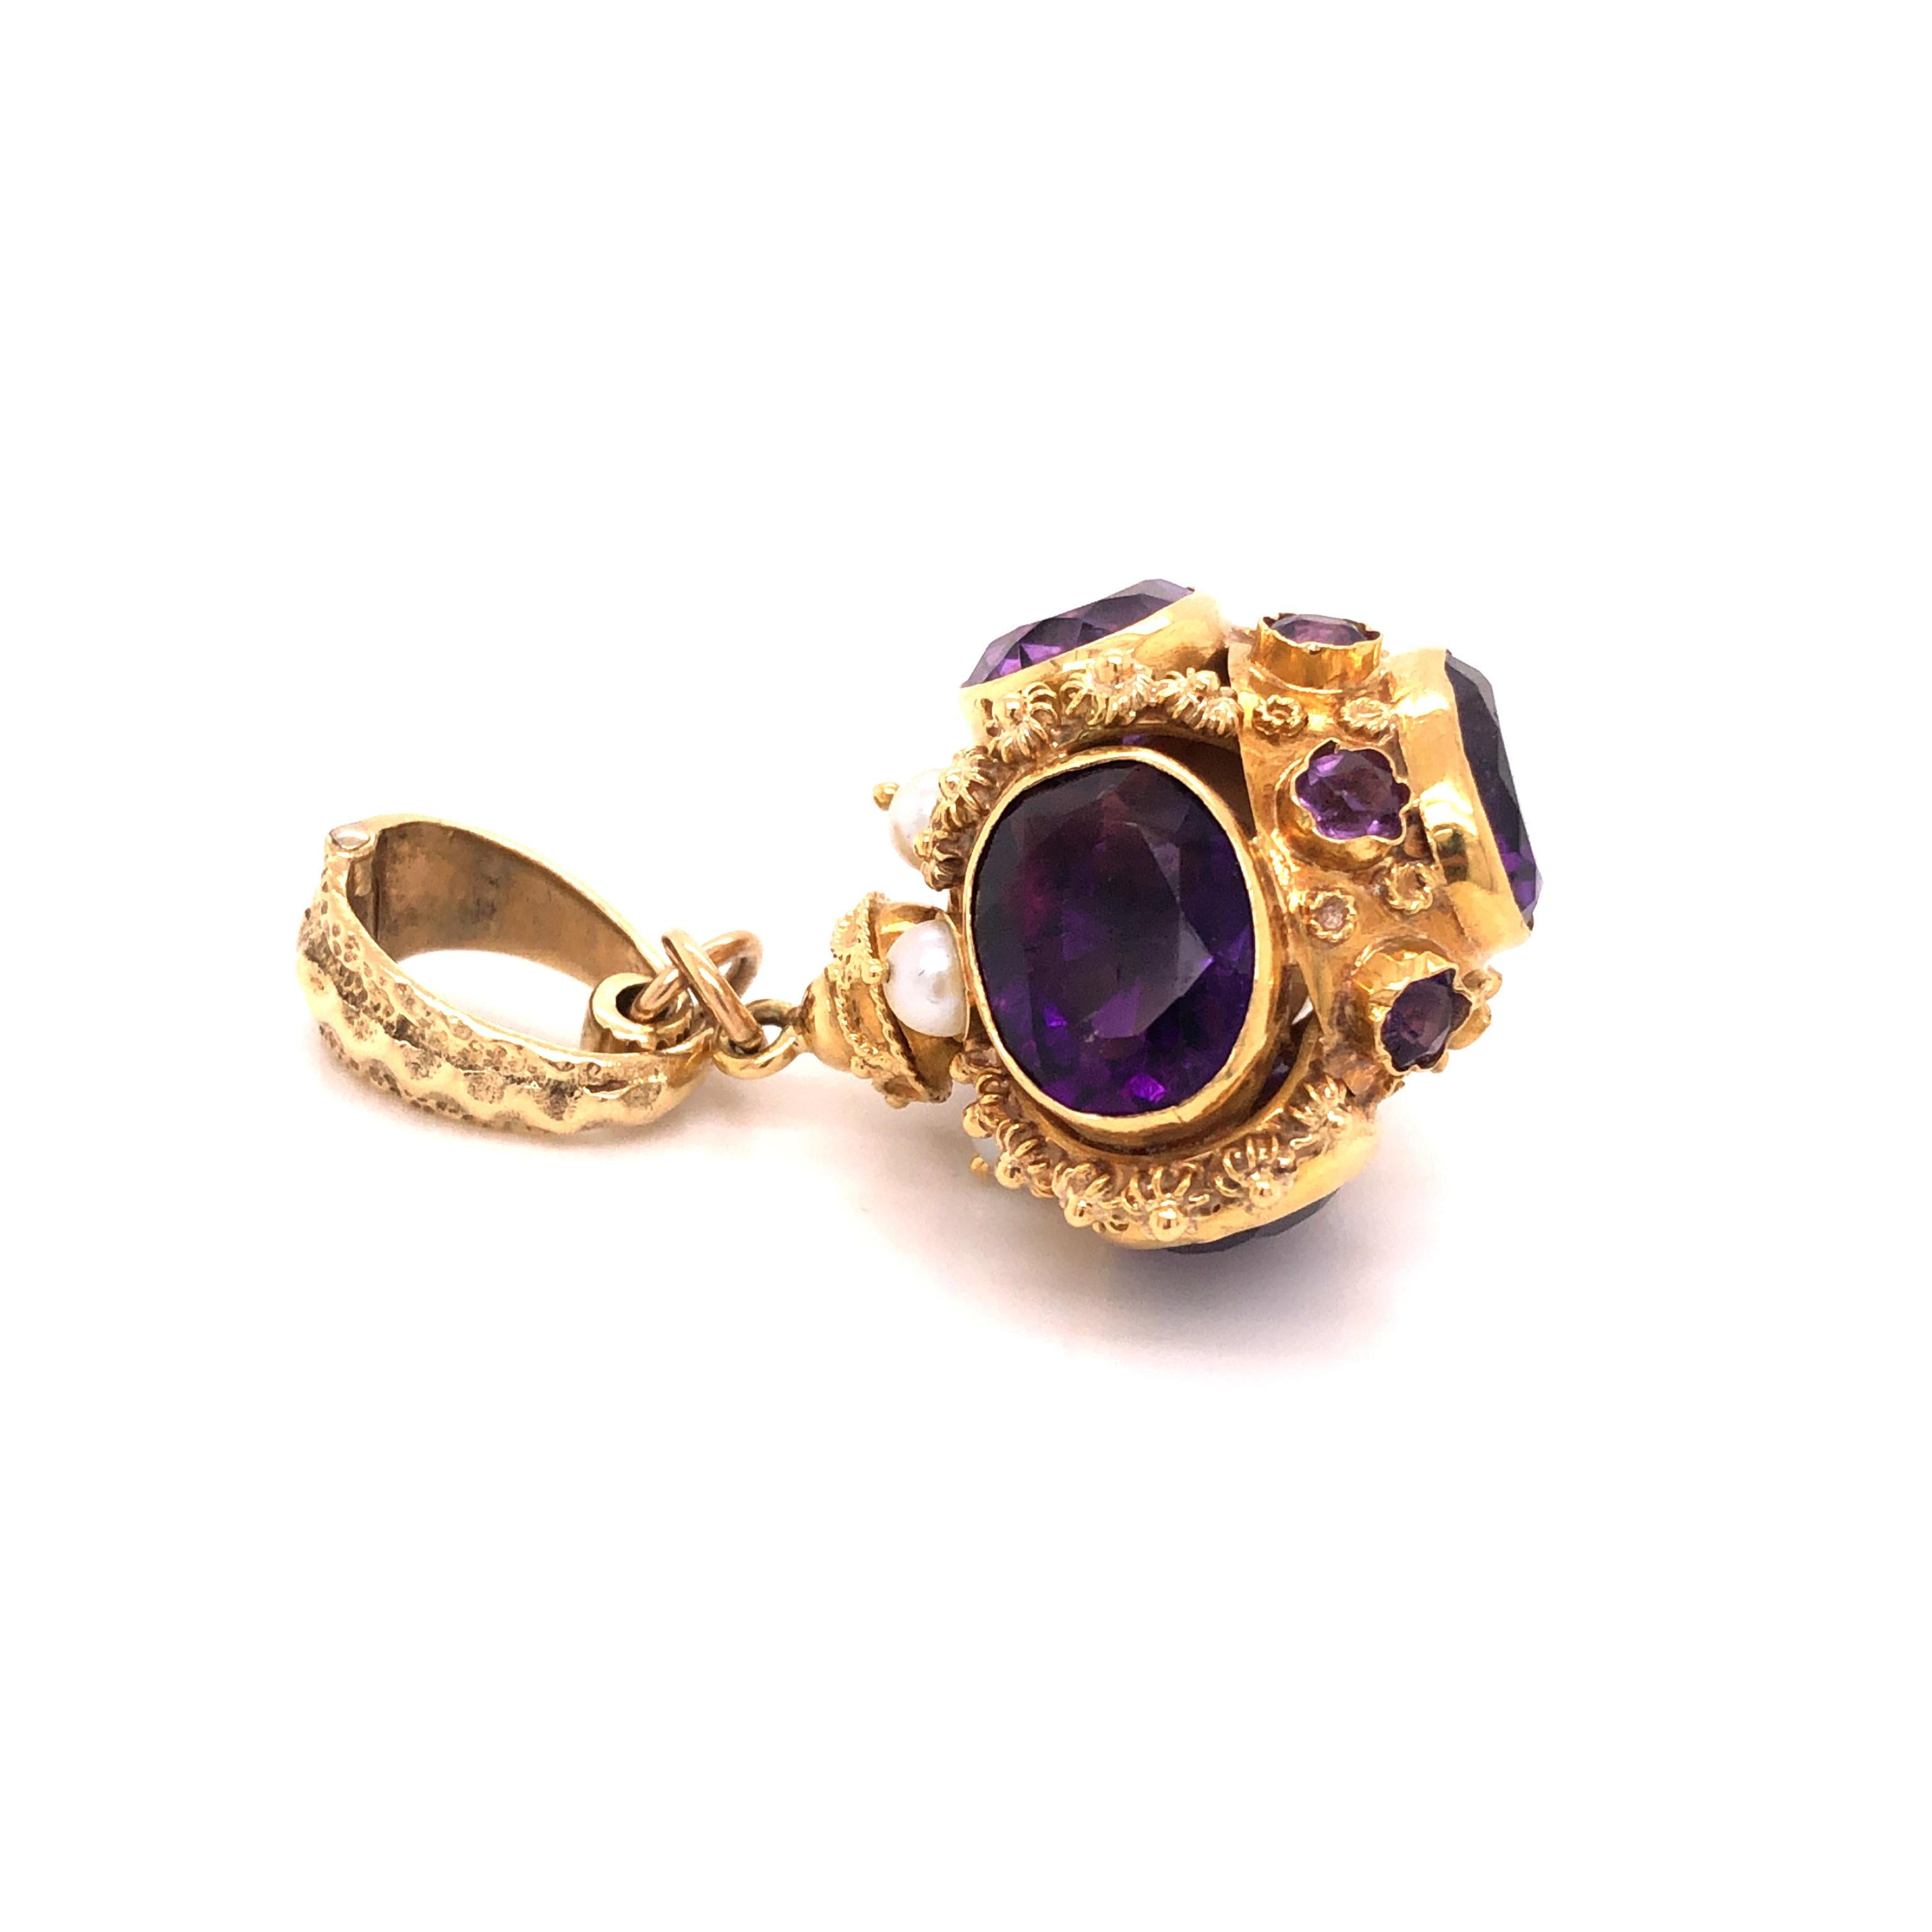 A vintage 14K yellow gold pendant featuring round and oval-shaped amethysts measuring 4.00 mm - 12.66 x 9.90 mm and weighing a total of approximately 20.00 carats, enhanced by cultured pearls measuring 4.10 mm - 4.20 mm, set in 14k